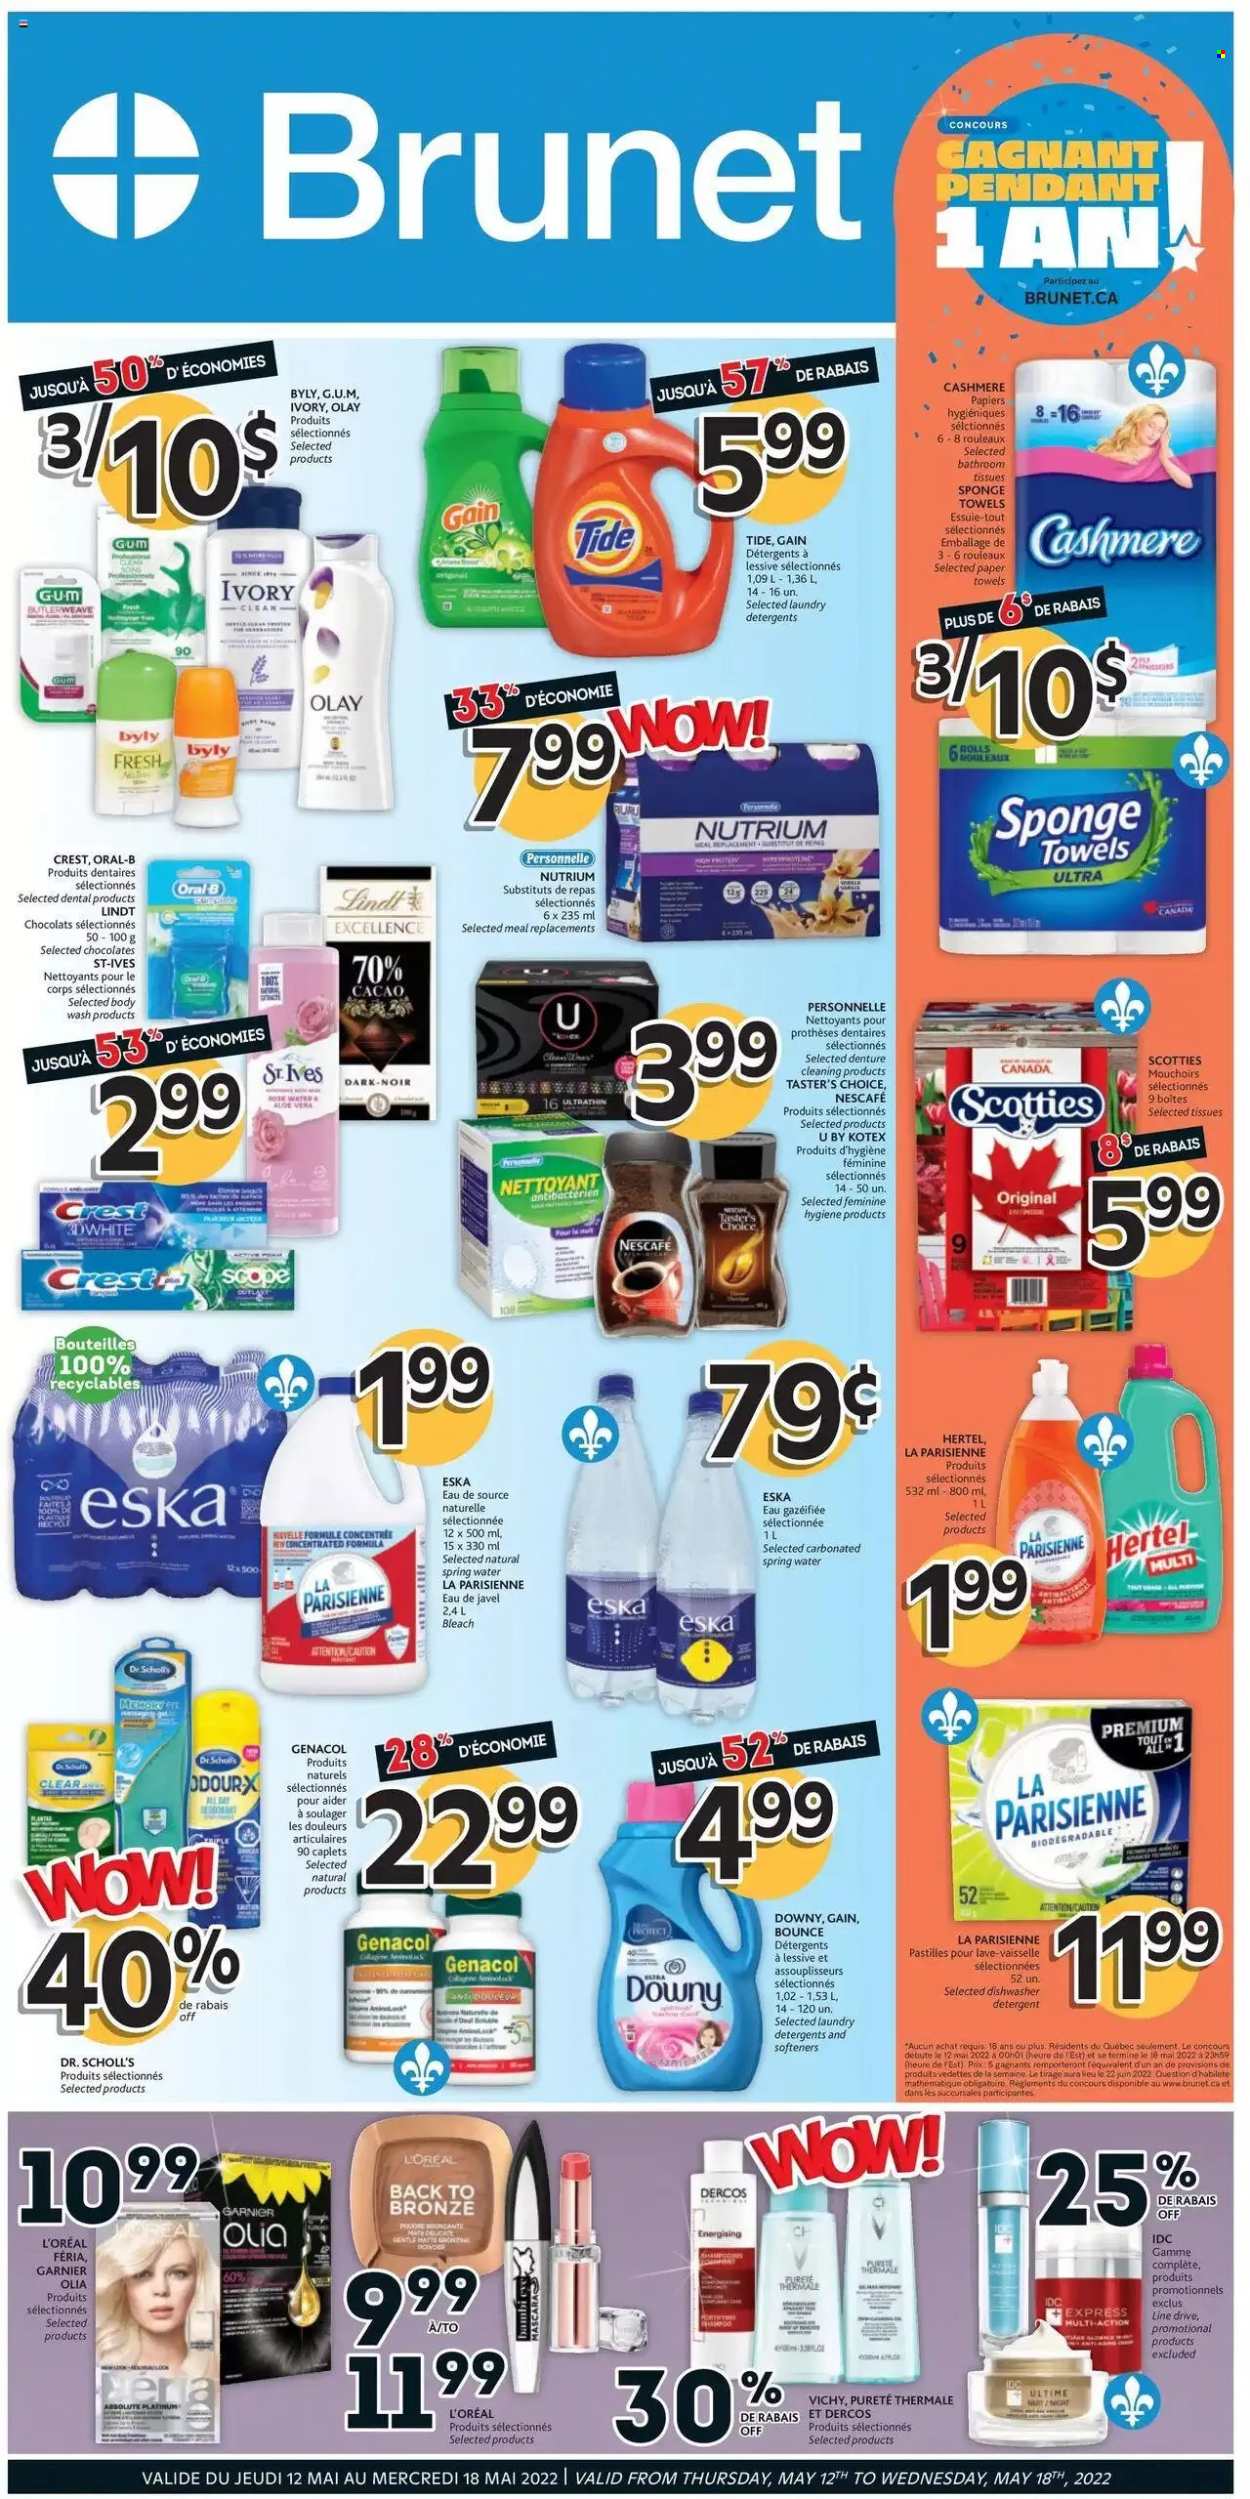 thumbnail - Brunet Flyer - May 12, 2022 - May 18, 2022 - Sales products - toilet paper, tissues, kitchen towels, paper towels, Gain, bleach, Tide, Bounce, body wash, Vichy, Crest, Kotex, L’Oréal, Olay, Dr. Scholl's, detergent, Garnier, Oral-B, Lindt, Nescafé. Page 1.